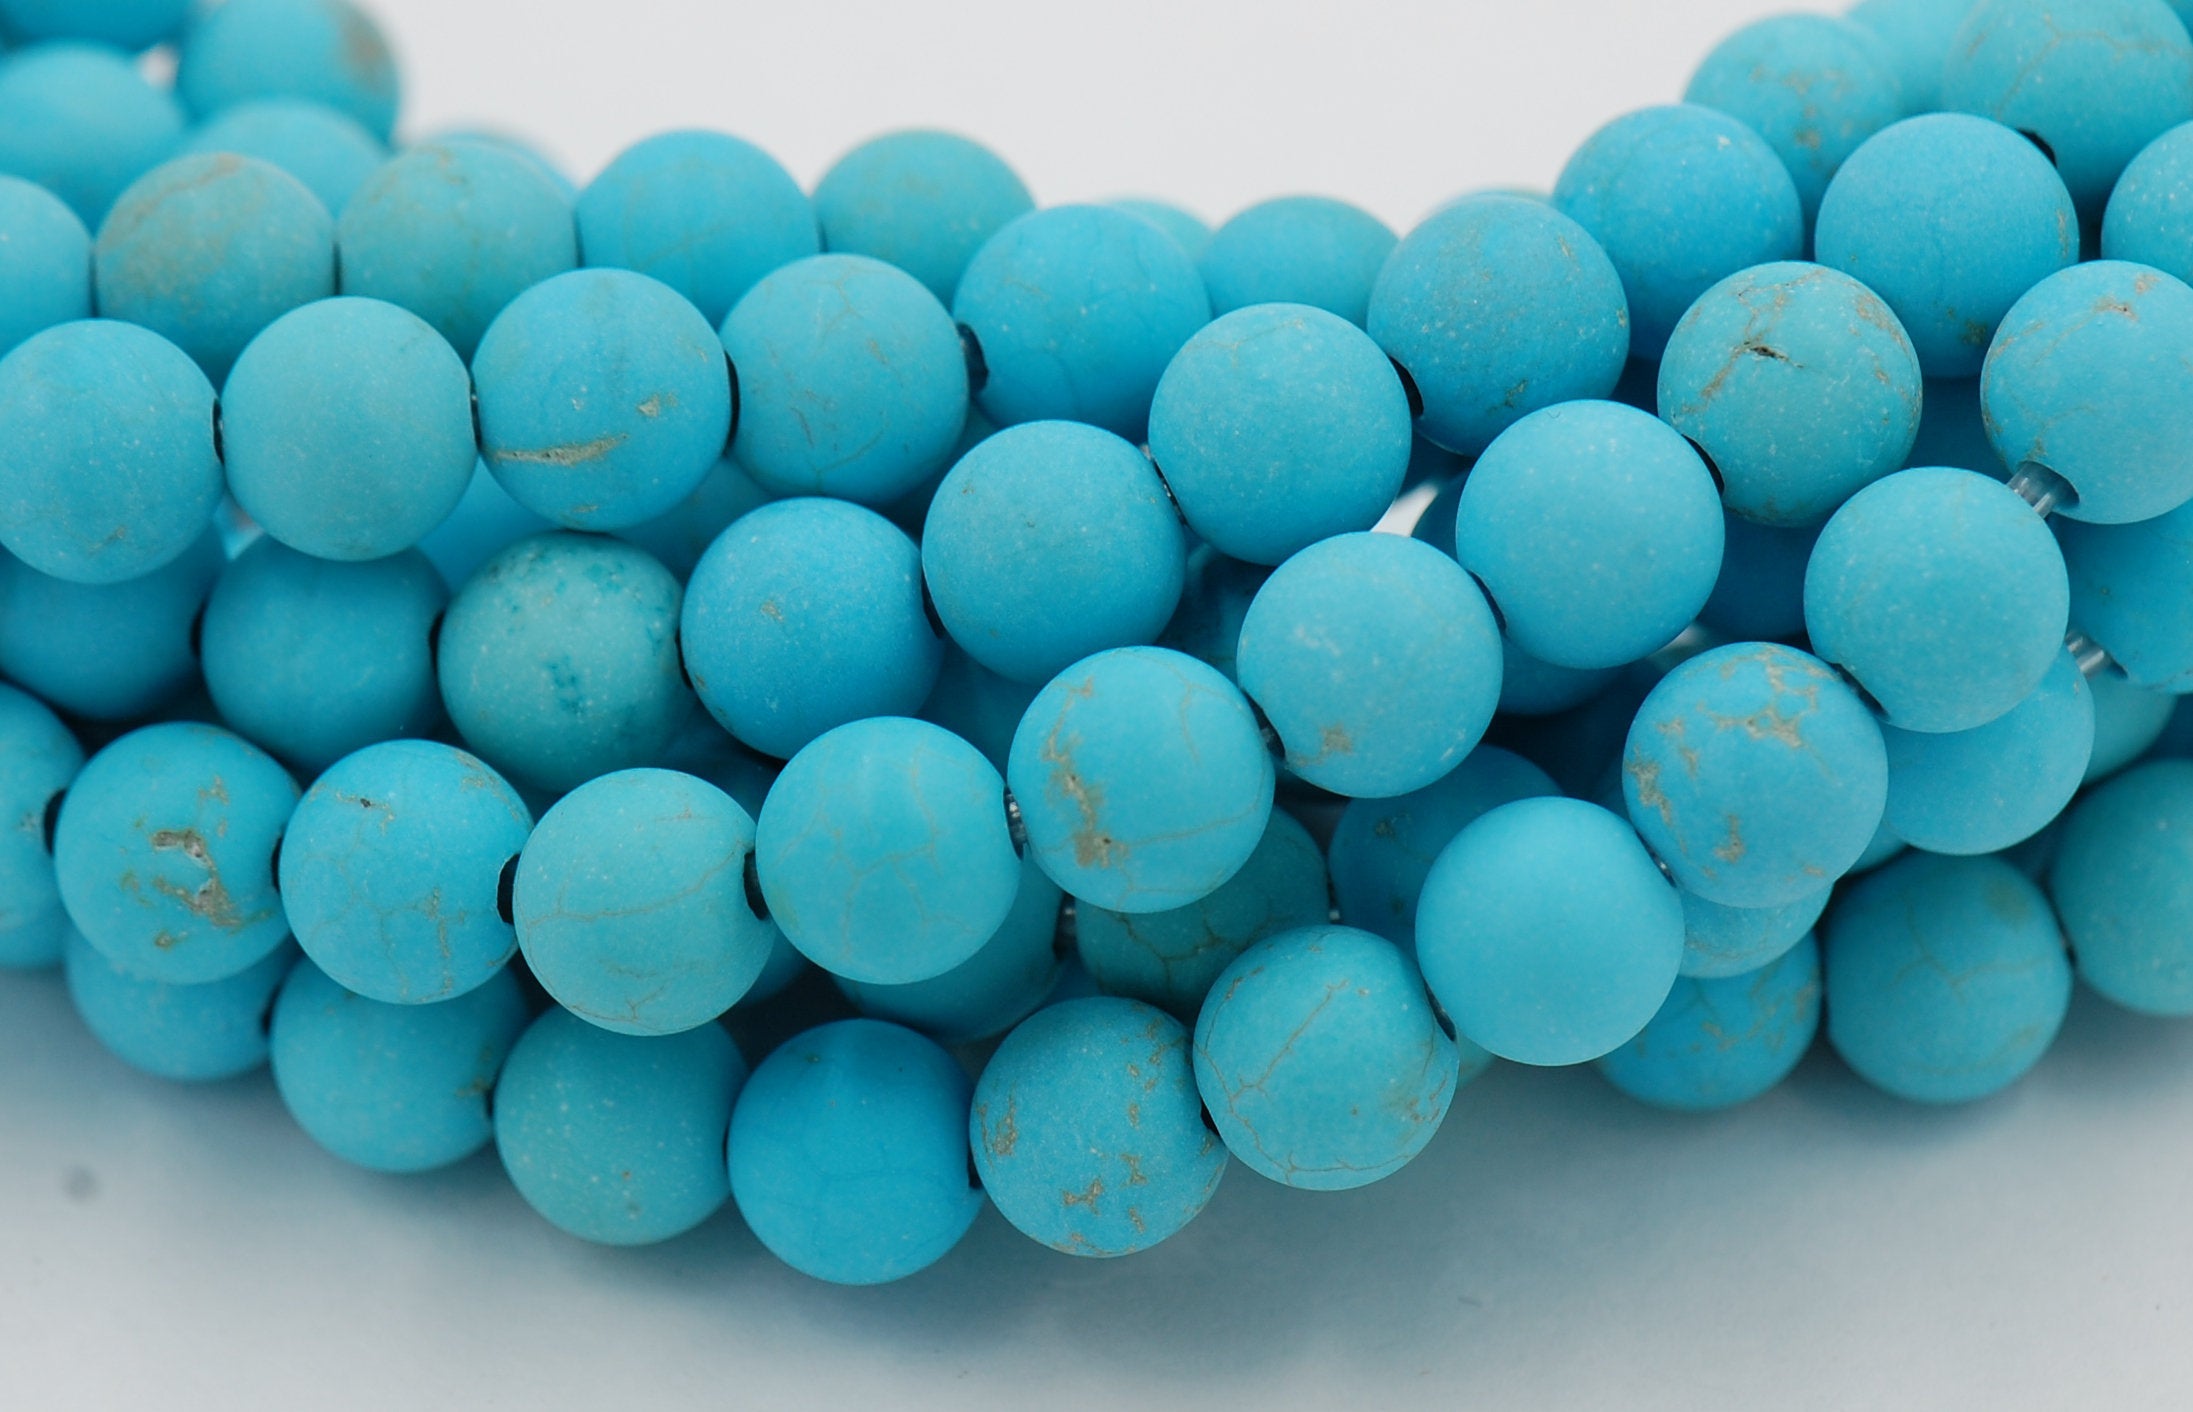 Large Hole Matte Turquoise Magnesite 4mm, 6mm, 8mm, 10mm, 12mm Round Beads -15 inch strand